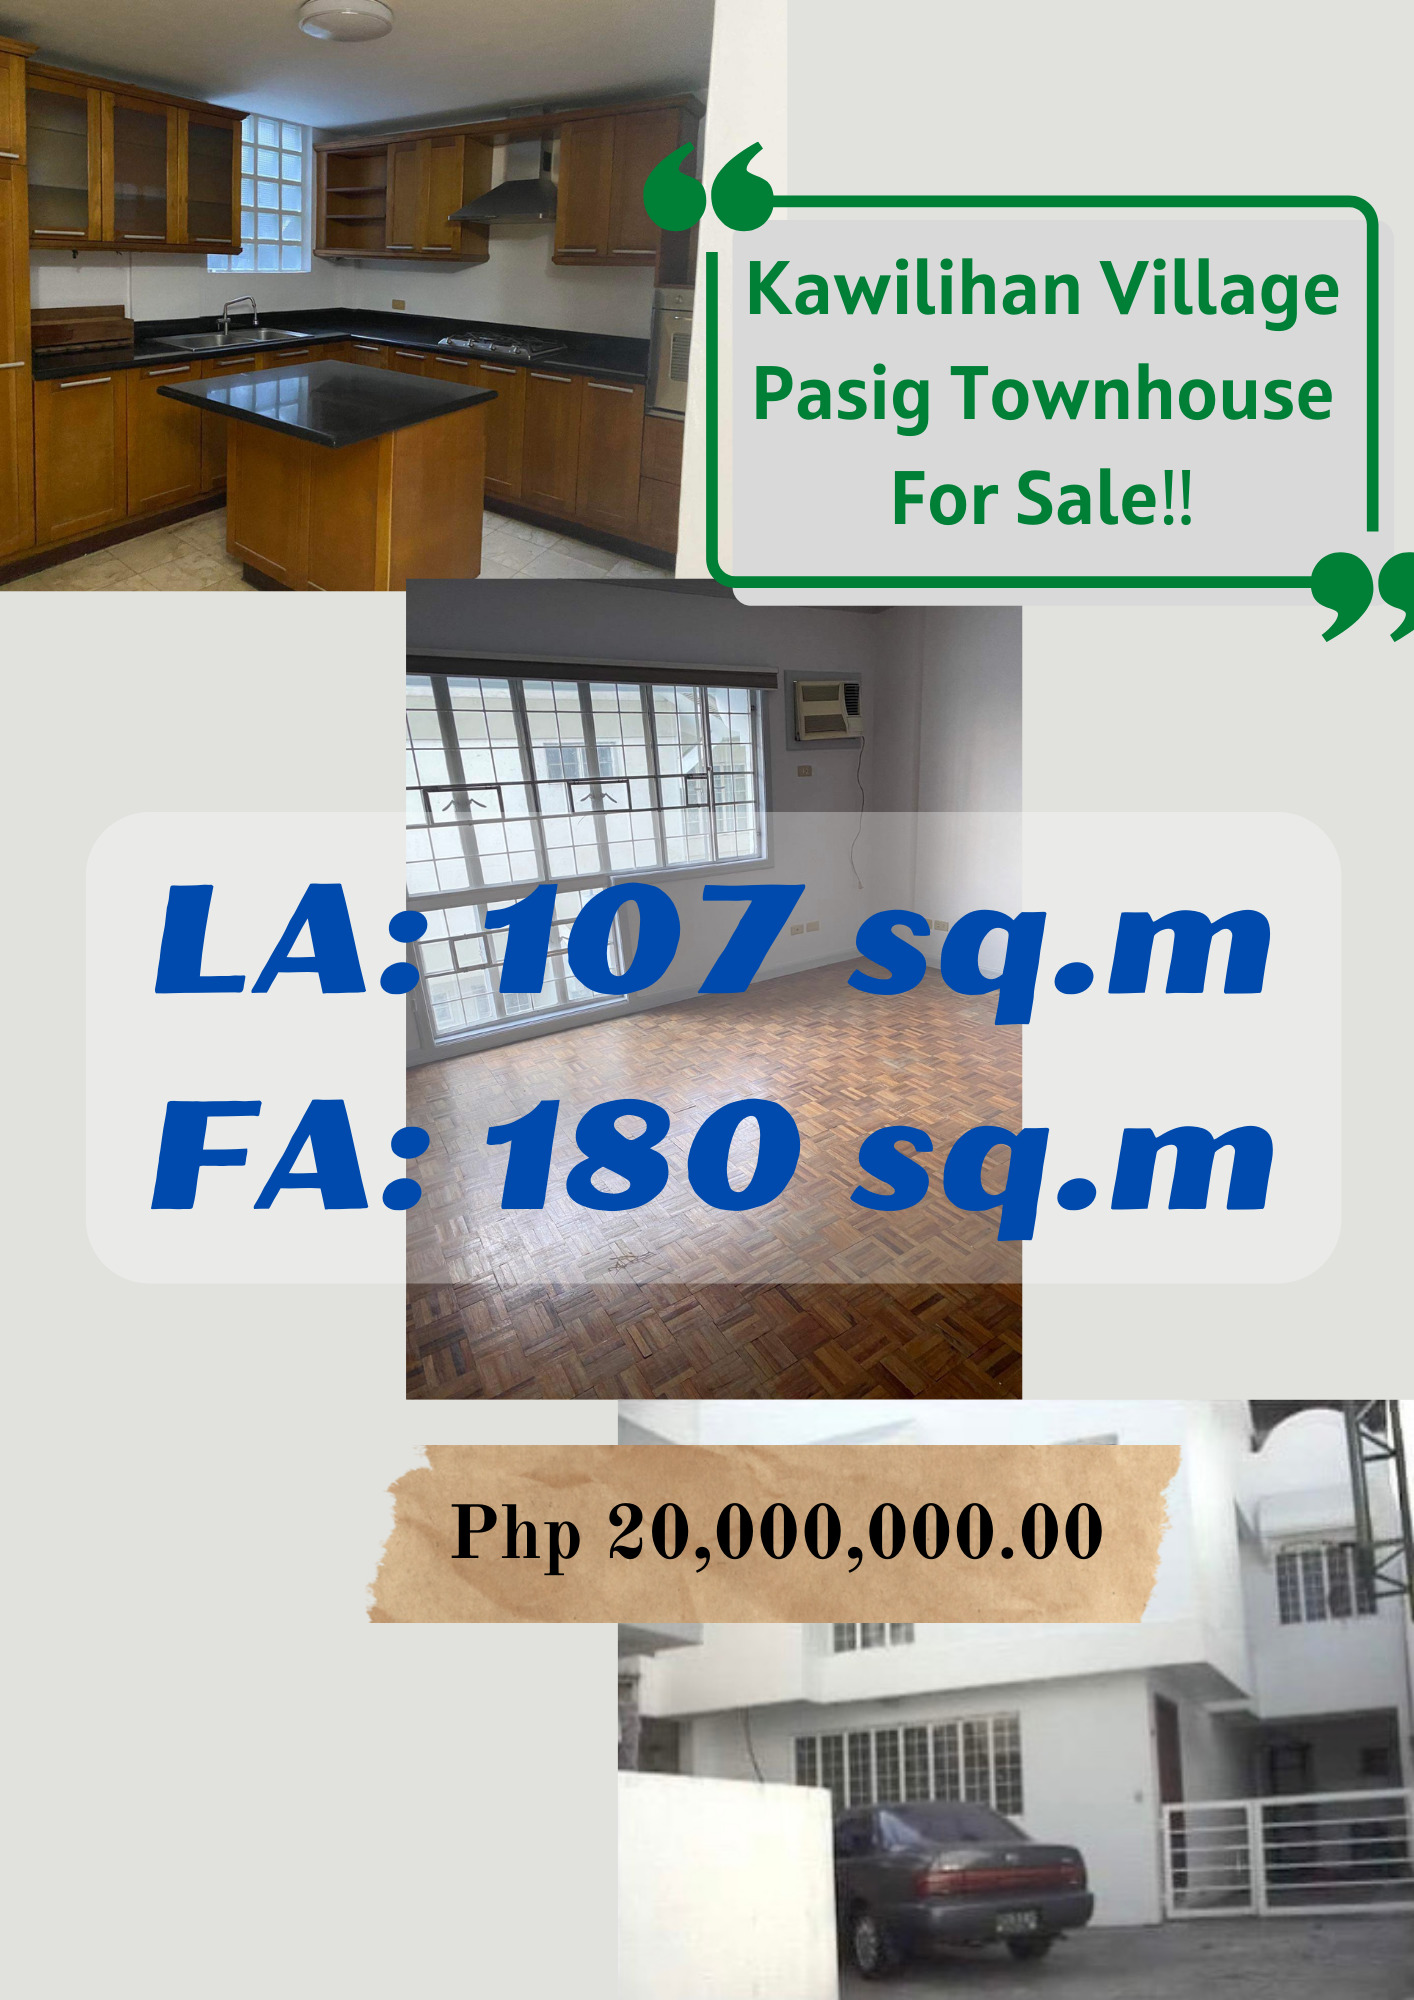 Kawilihan Village Pasig Townhouse For Sale with Php 20,000,000.00‼️